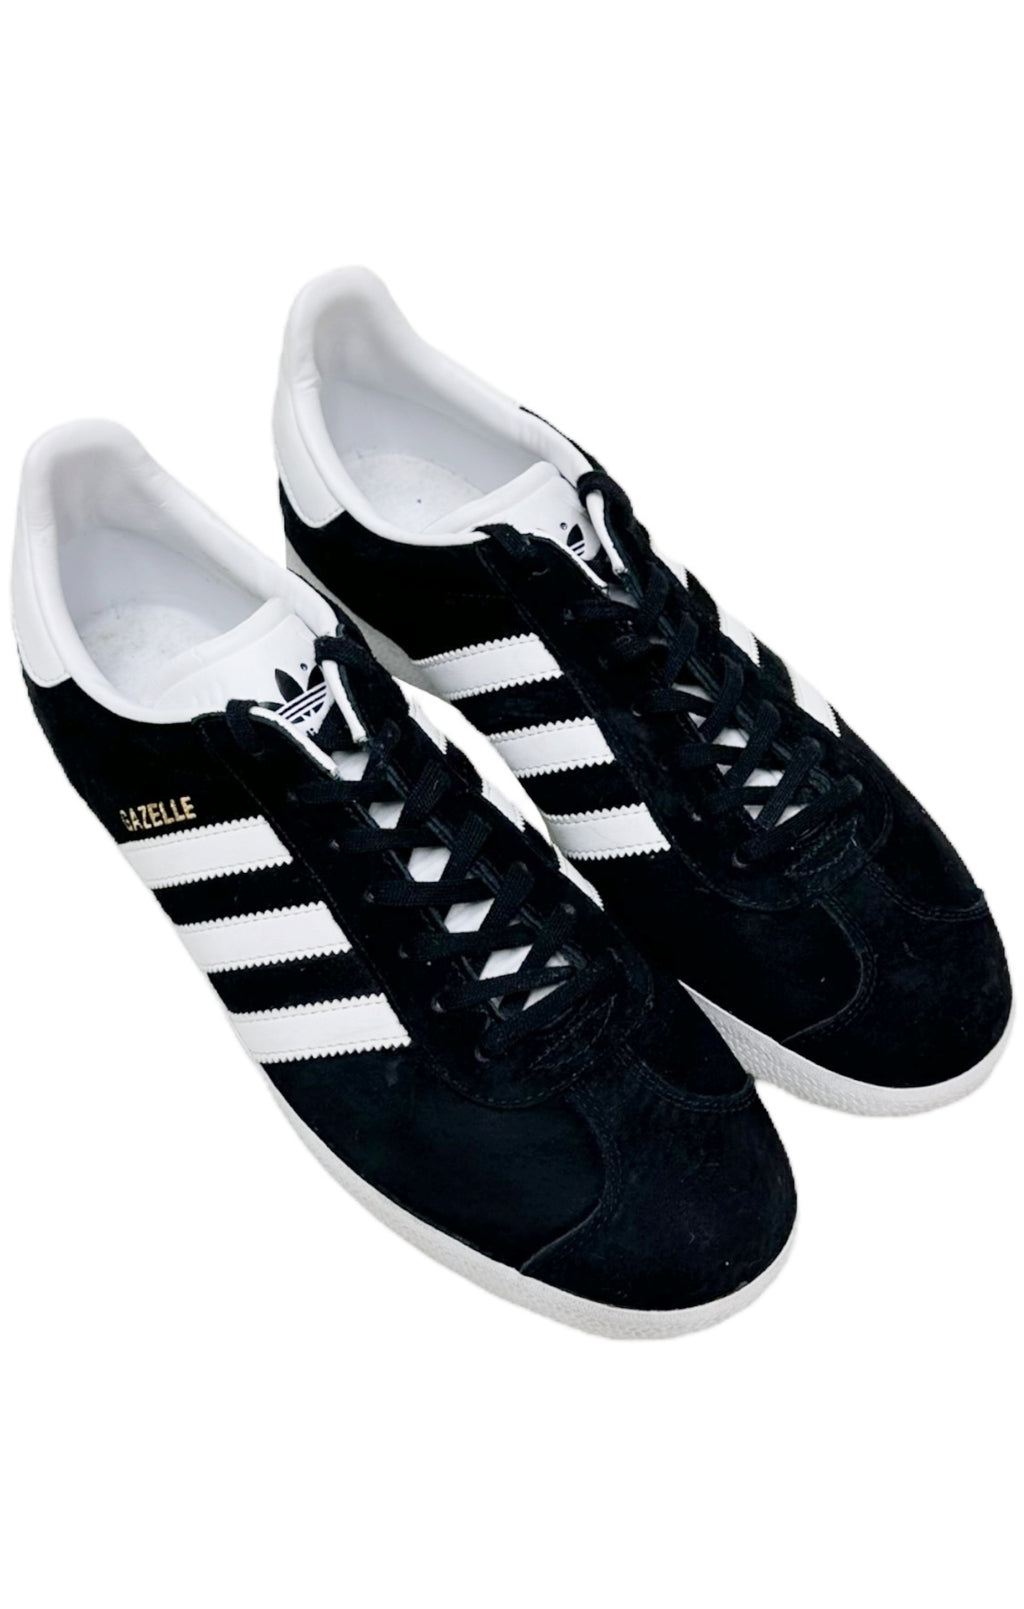 ADIDAS Sneakers Size: Men's US 10